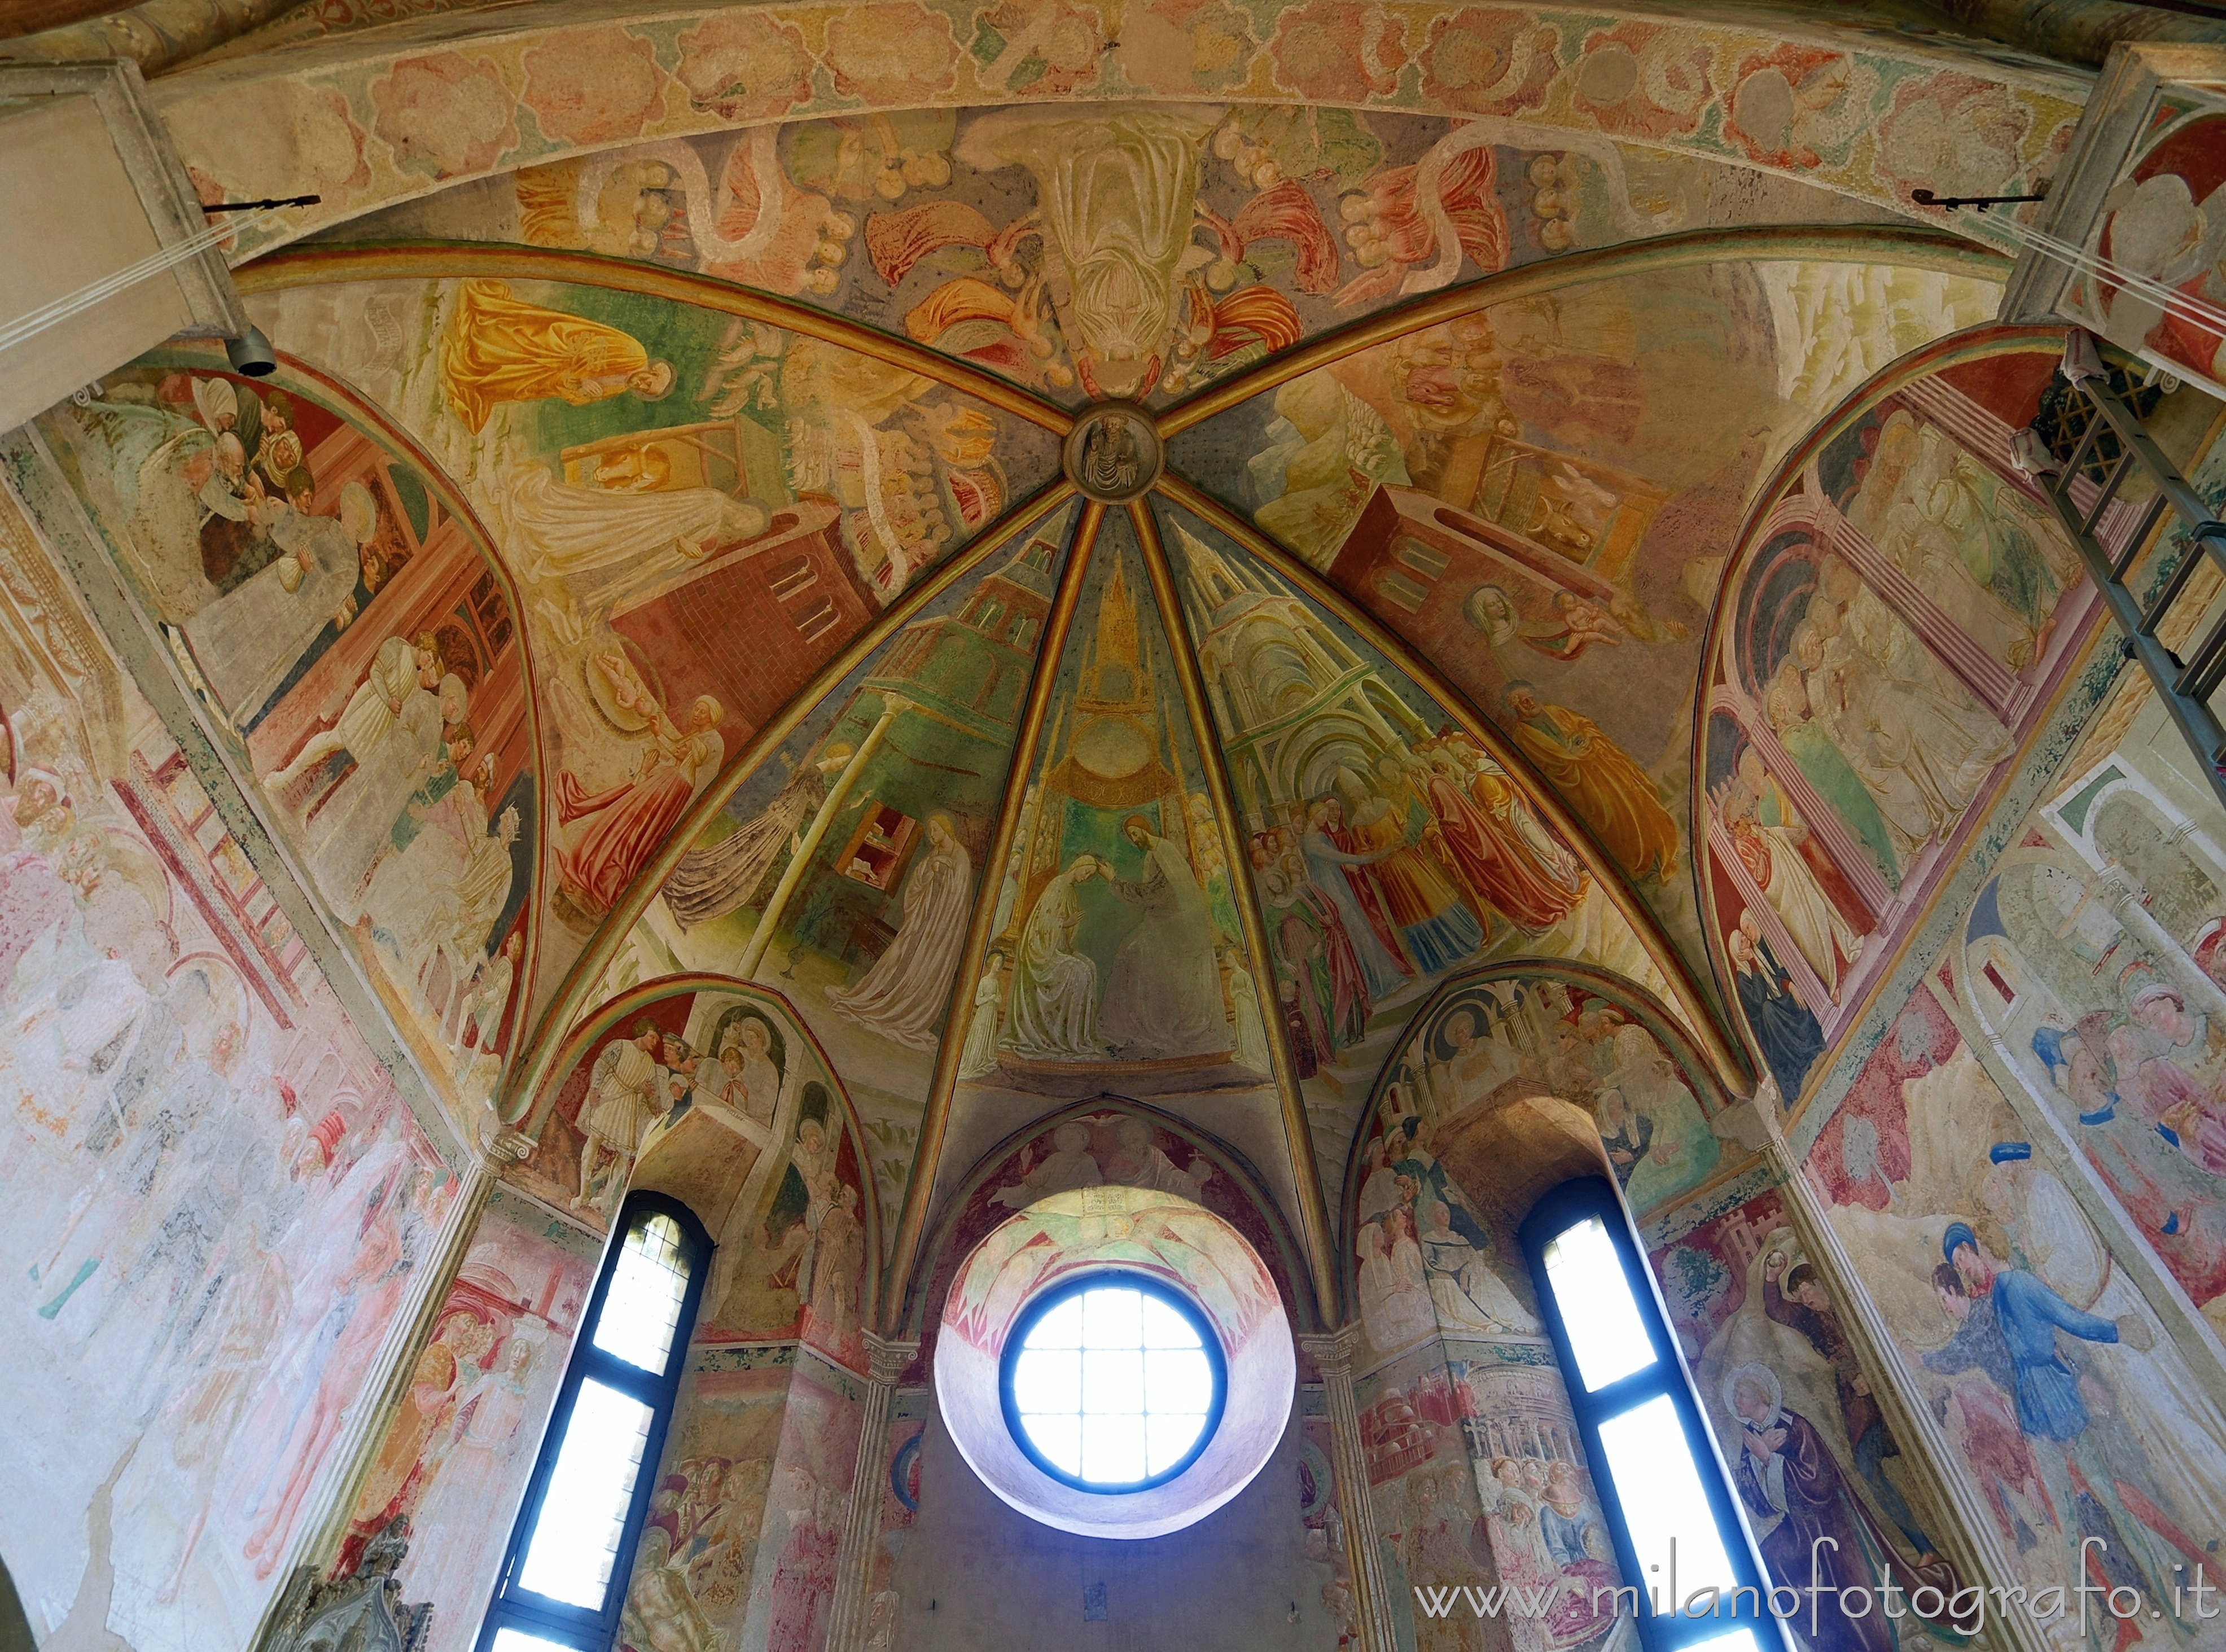 Castiglione Olona (Varese, Italy): Apse of the Collegiate Church of Saints Stephen and Lawrence covered with renaissance frescoes - Castiglione Olona (Varese, Italy)